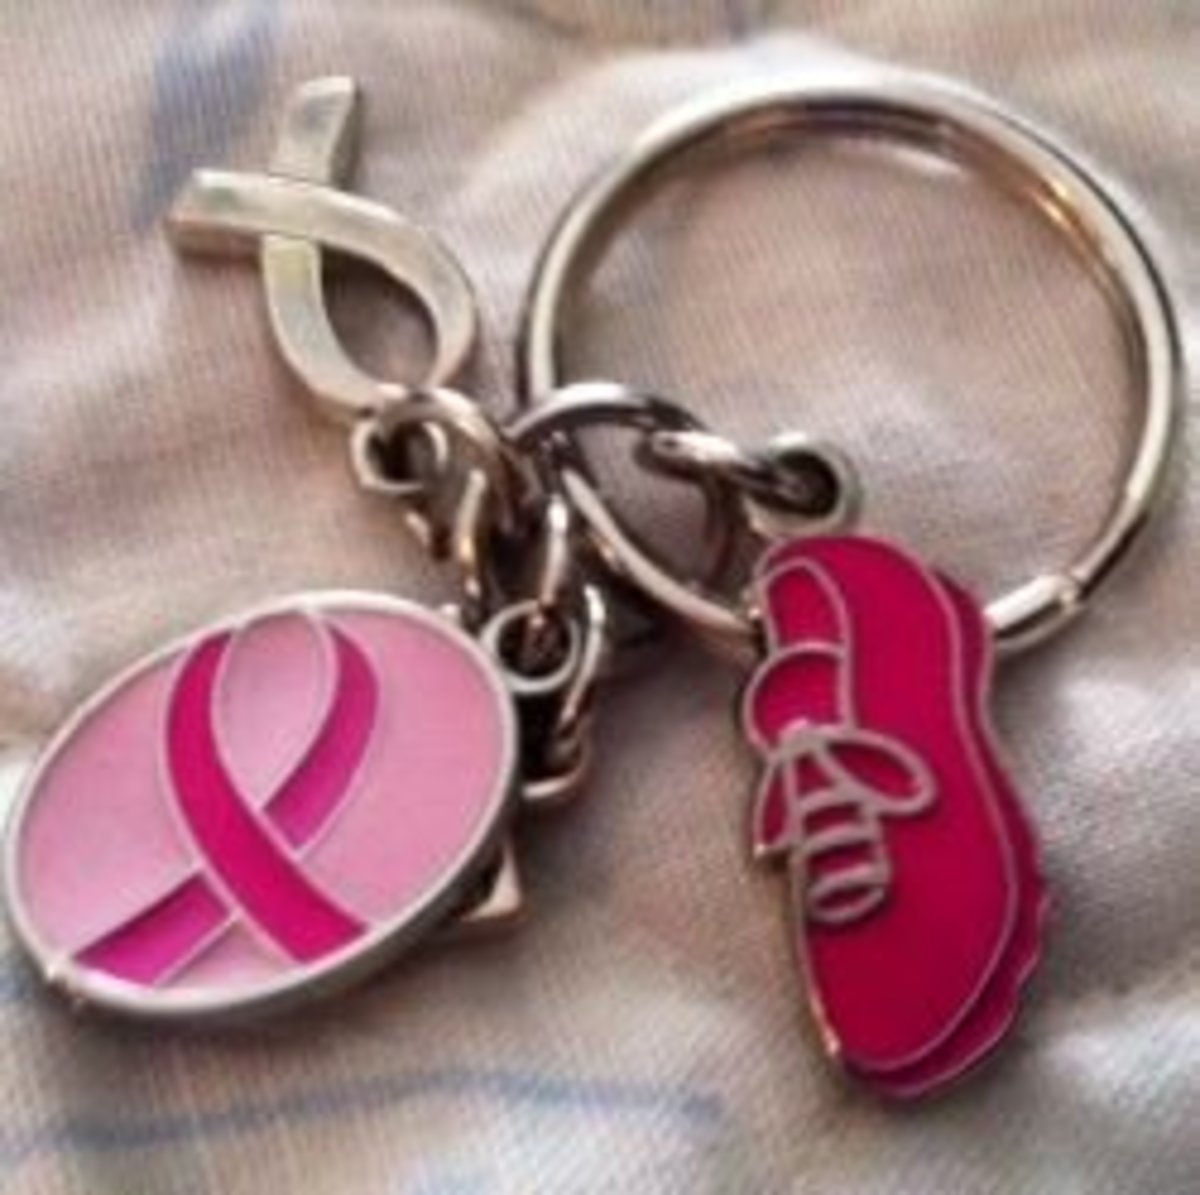 My Battles With Breast and Lung Cancer